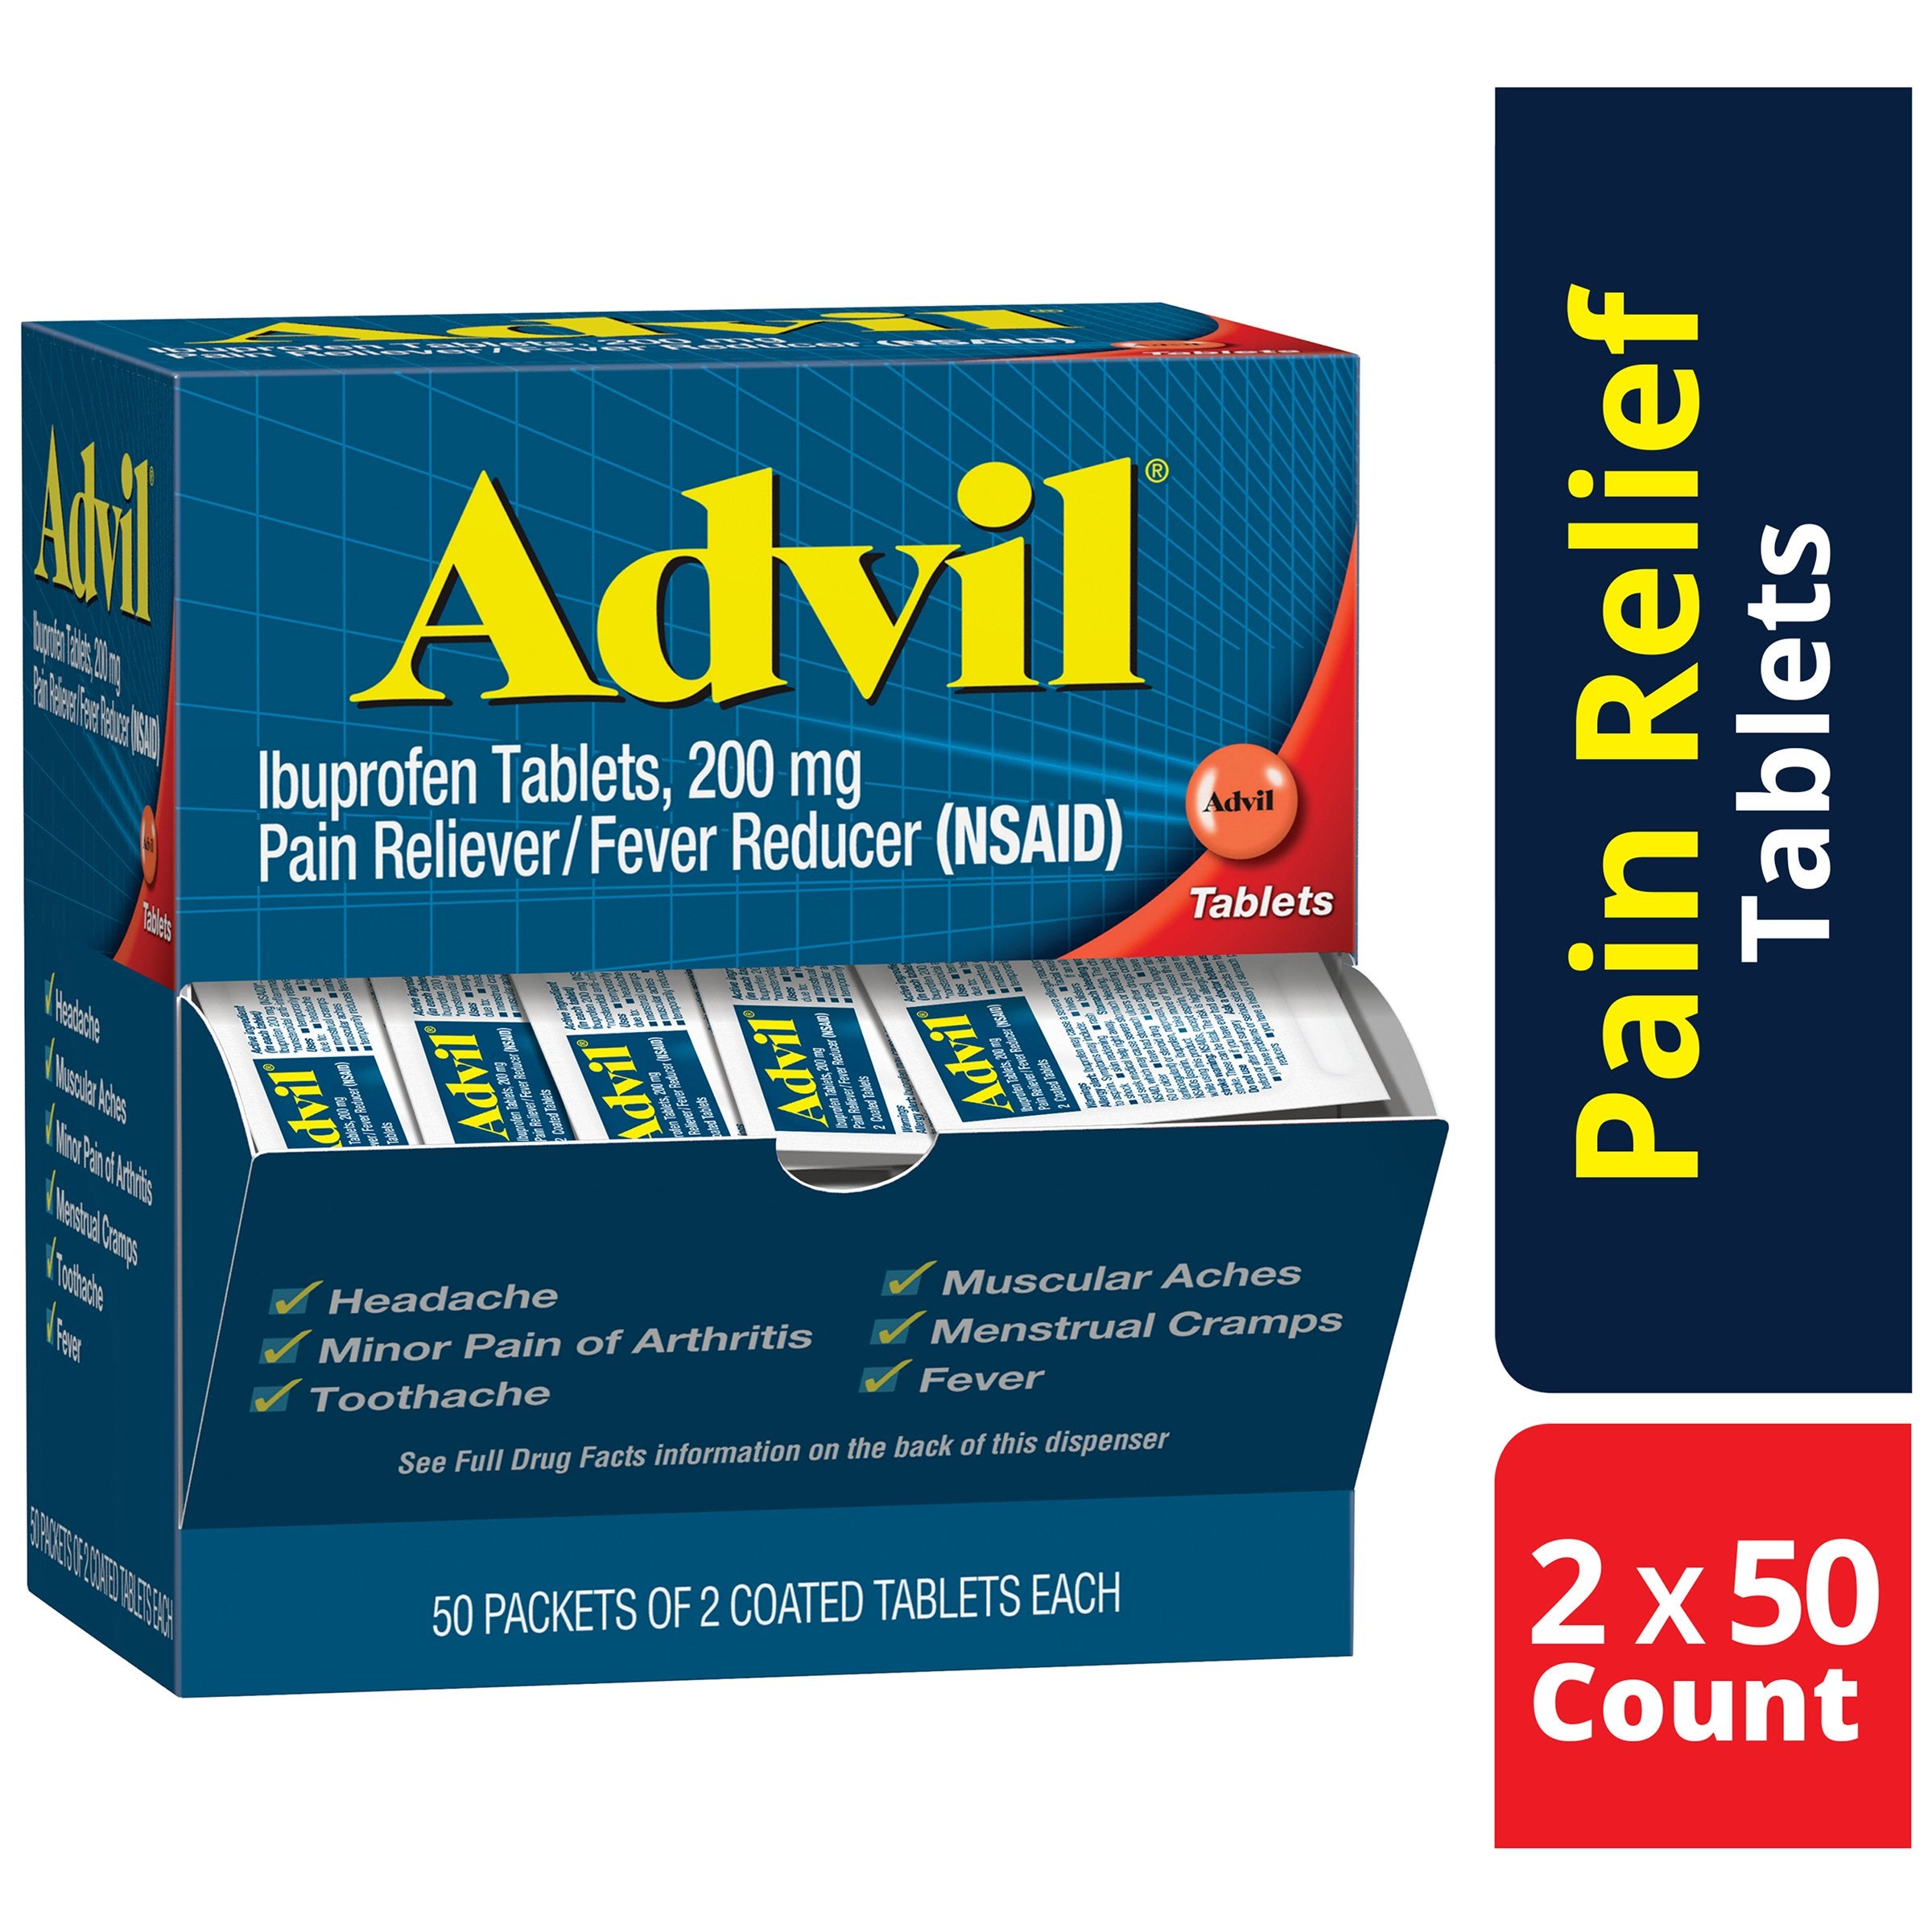 Advil Ibuprofen Tablets 200mg (50 packets of 2 coated tablets each) - MK Distro